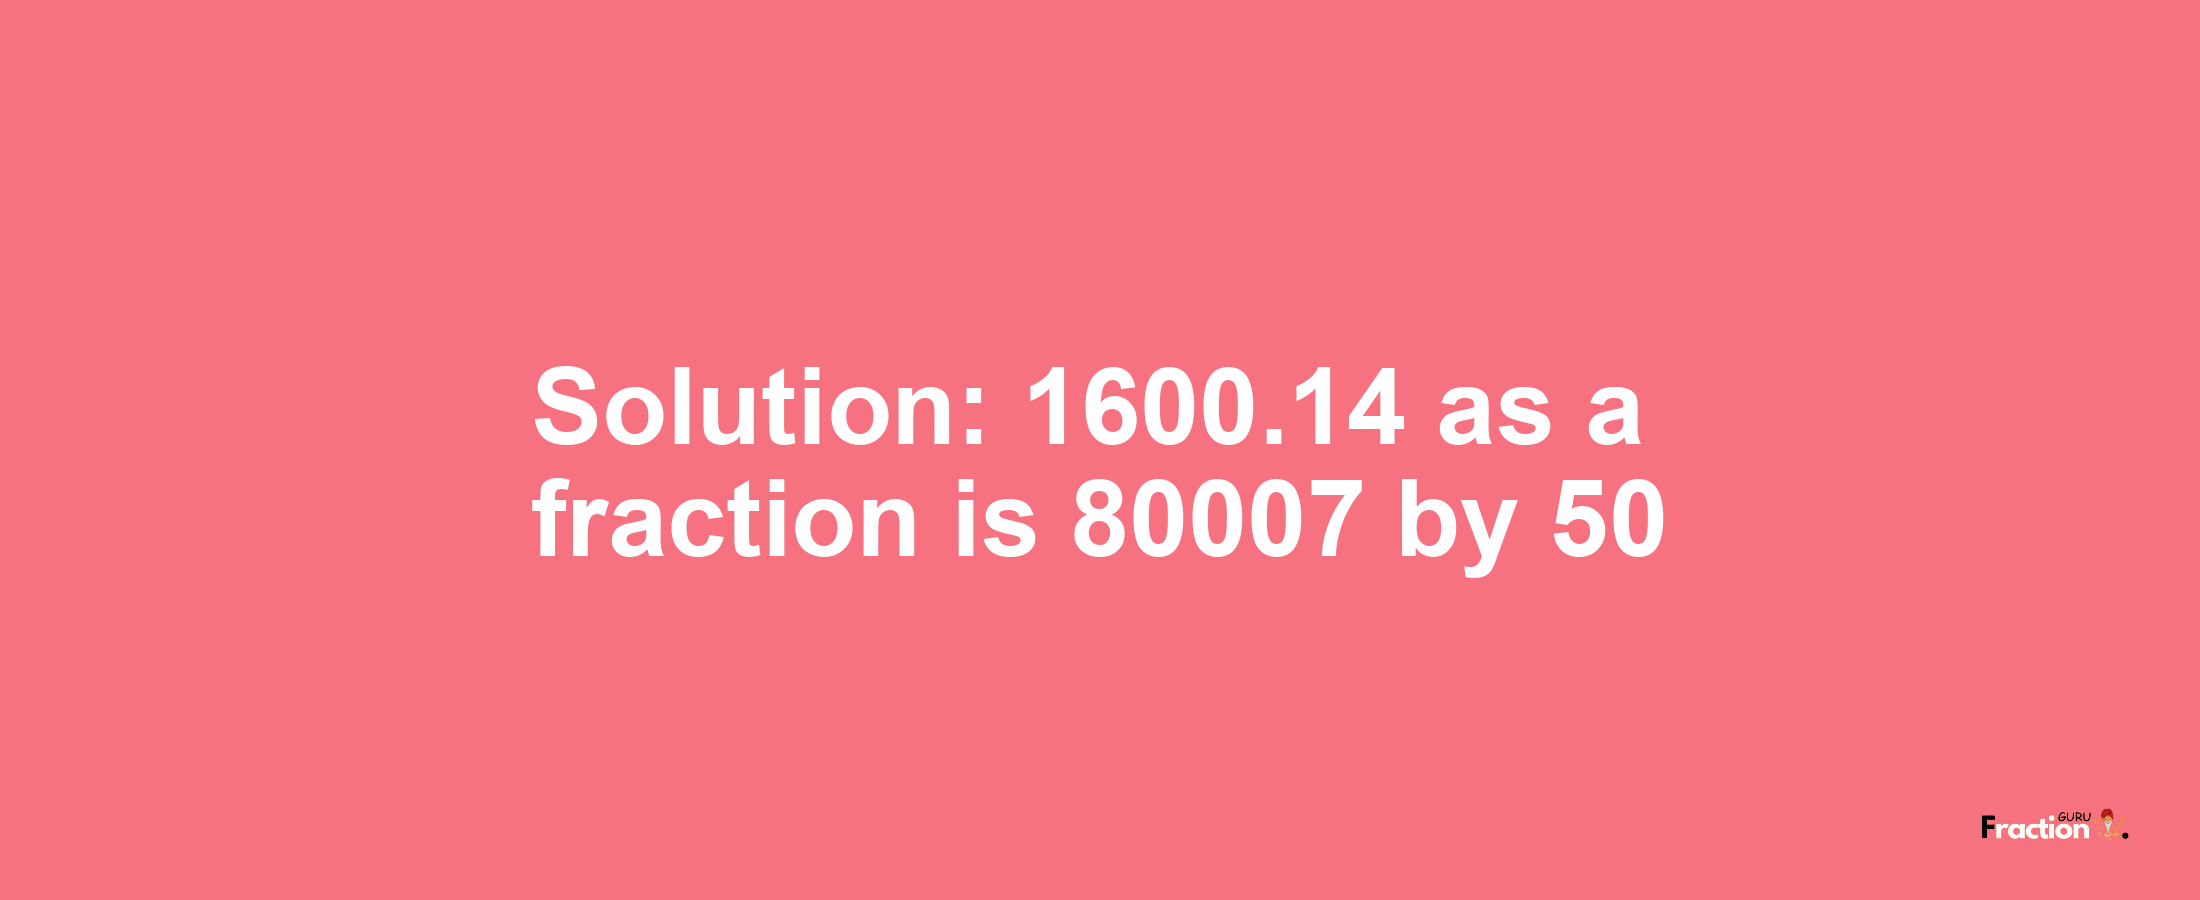 Solution:1600.14 as a fraction is 80007/50